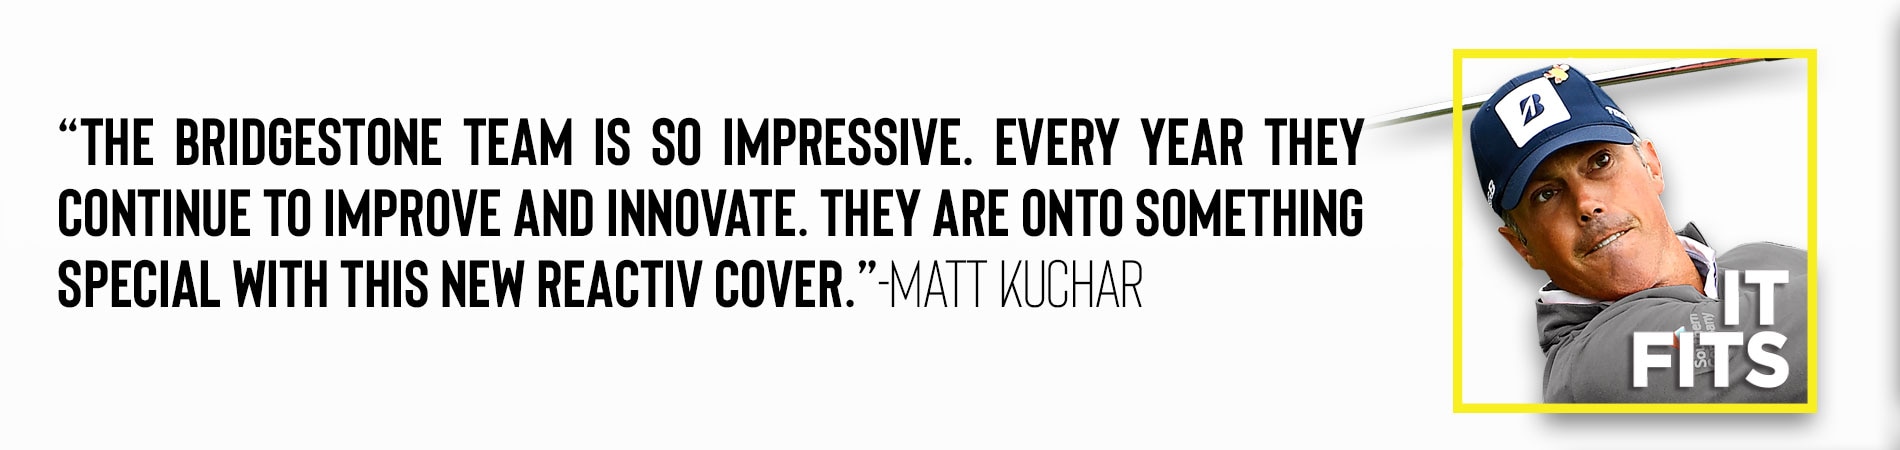 They are on to something special with this new reactive cover.  Matt Kuchar.